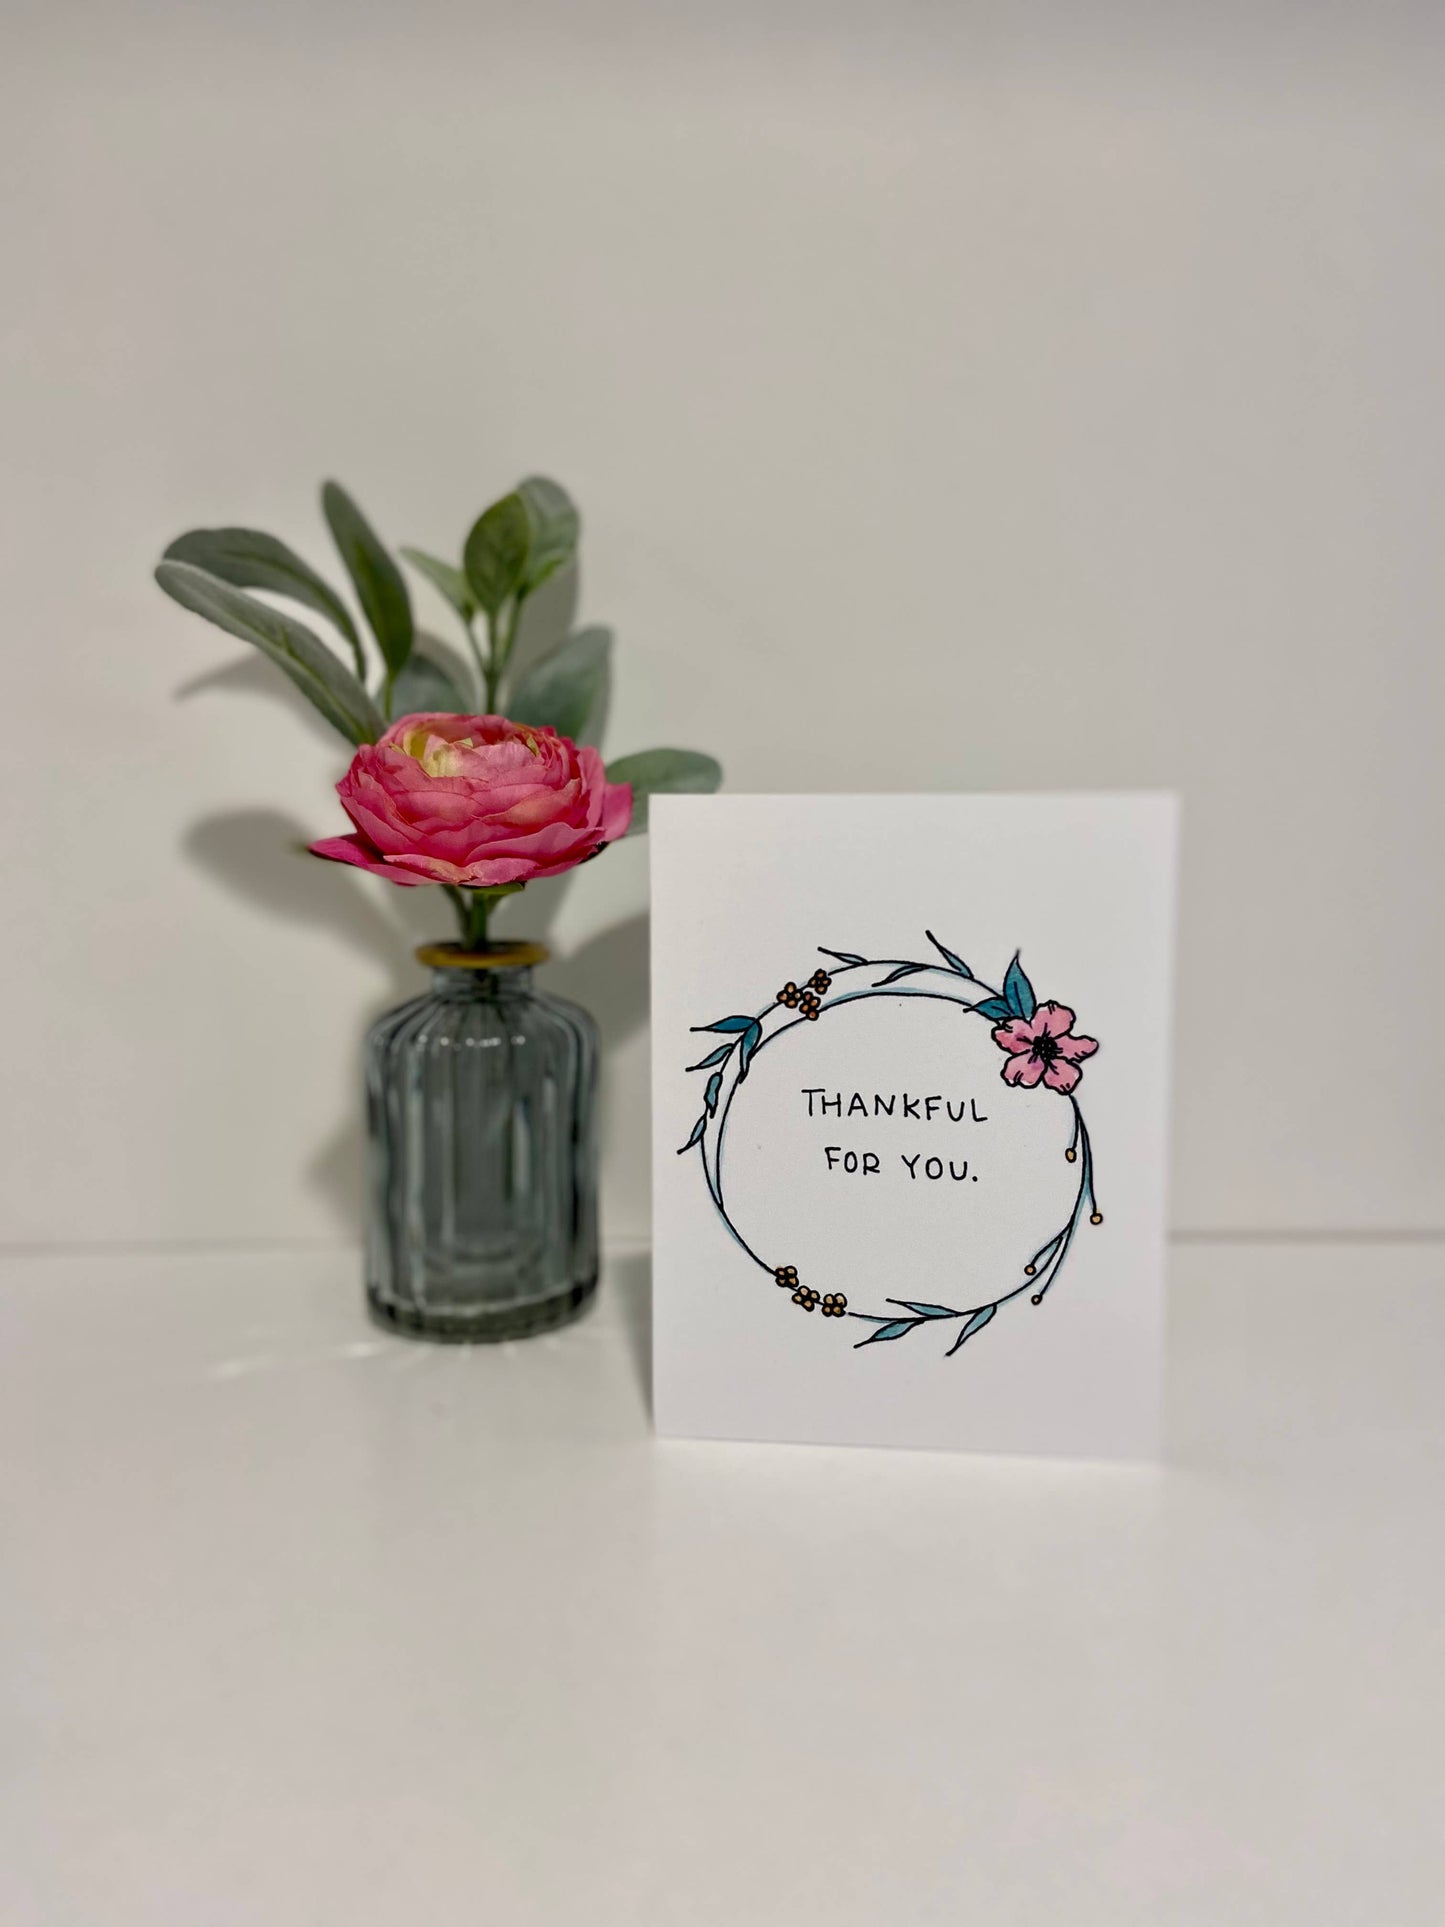 Thank You "Floral" Card